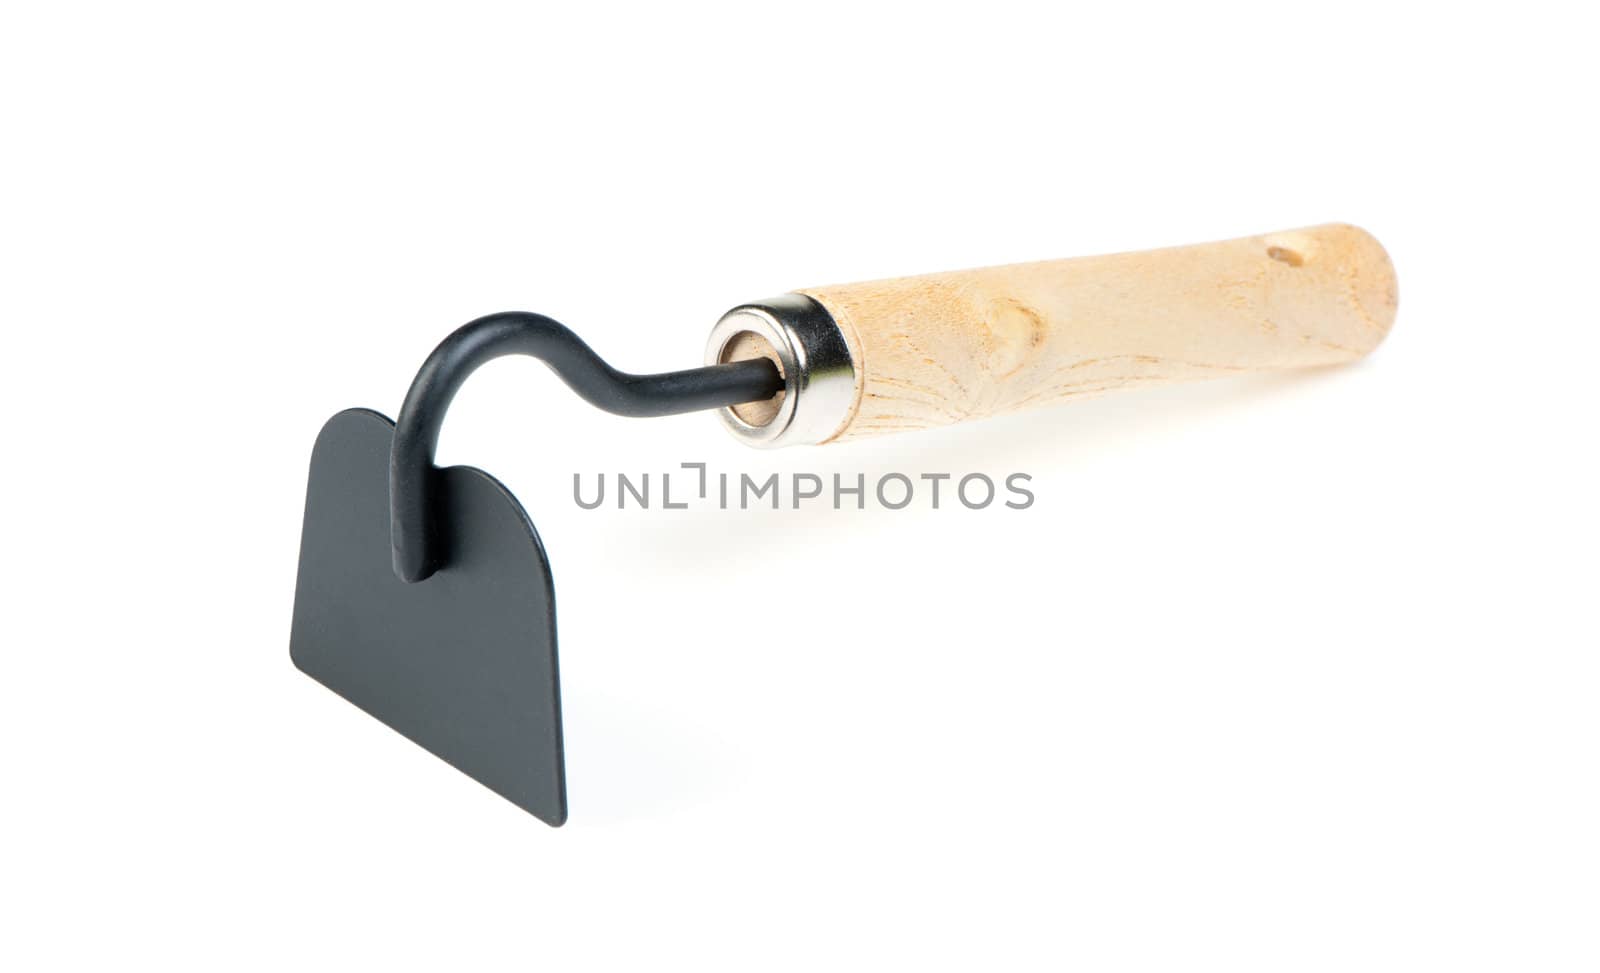 The garden tool a chopper. Isolated on a white background